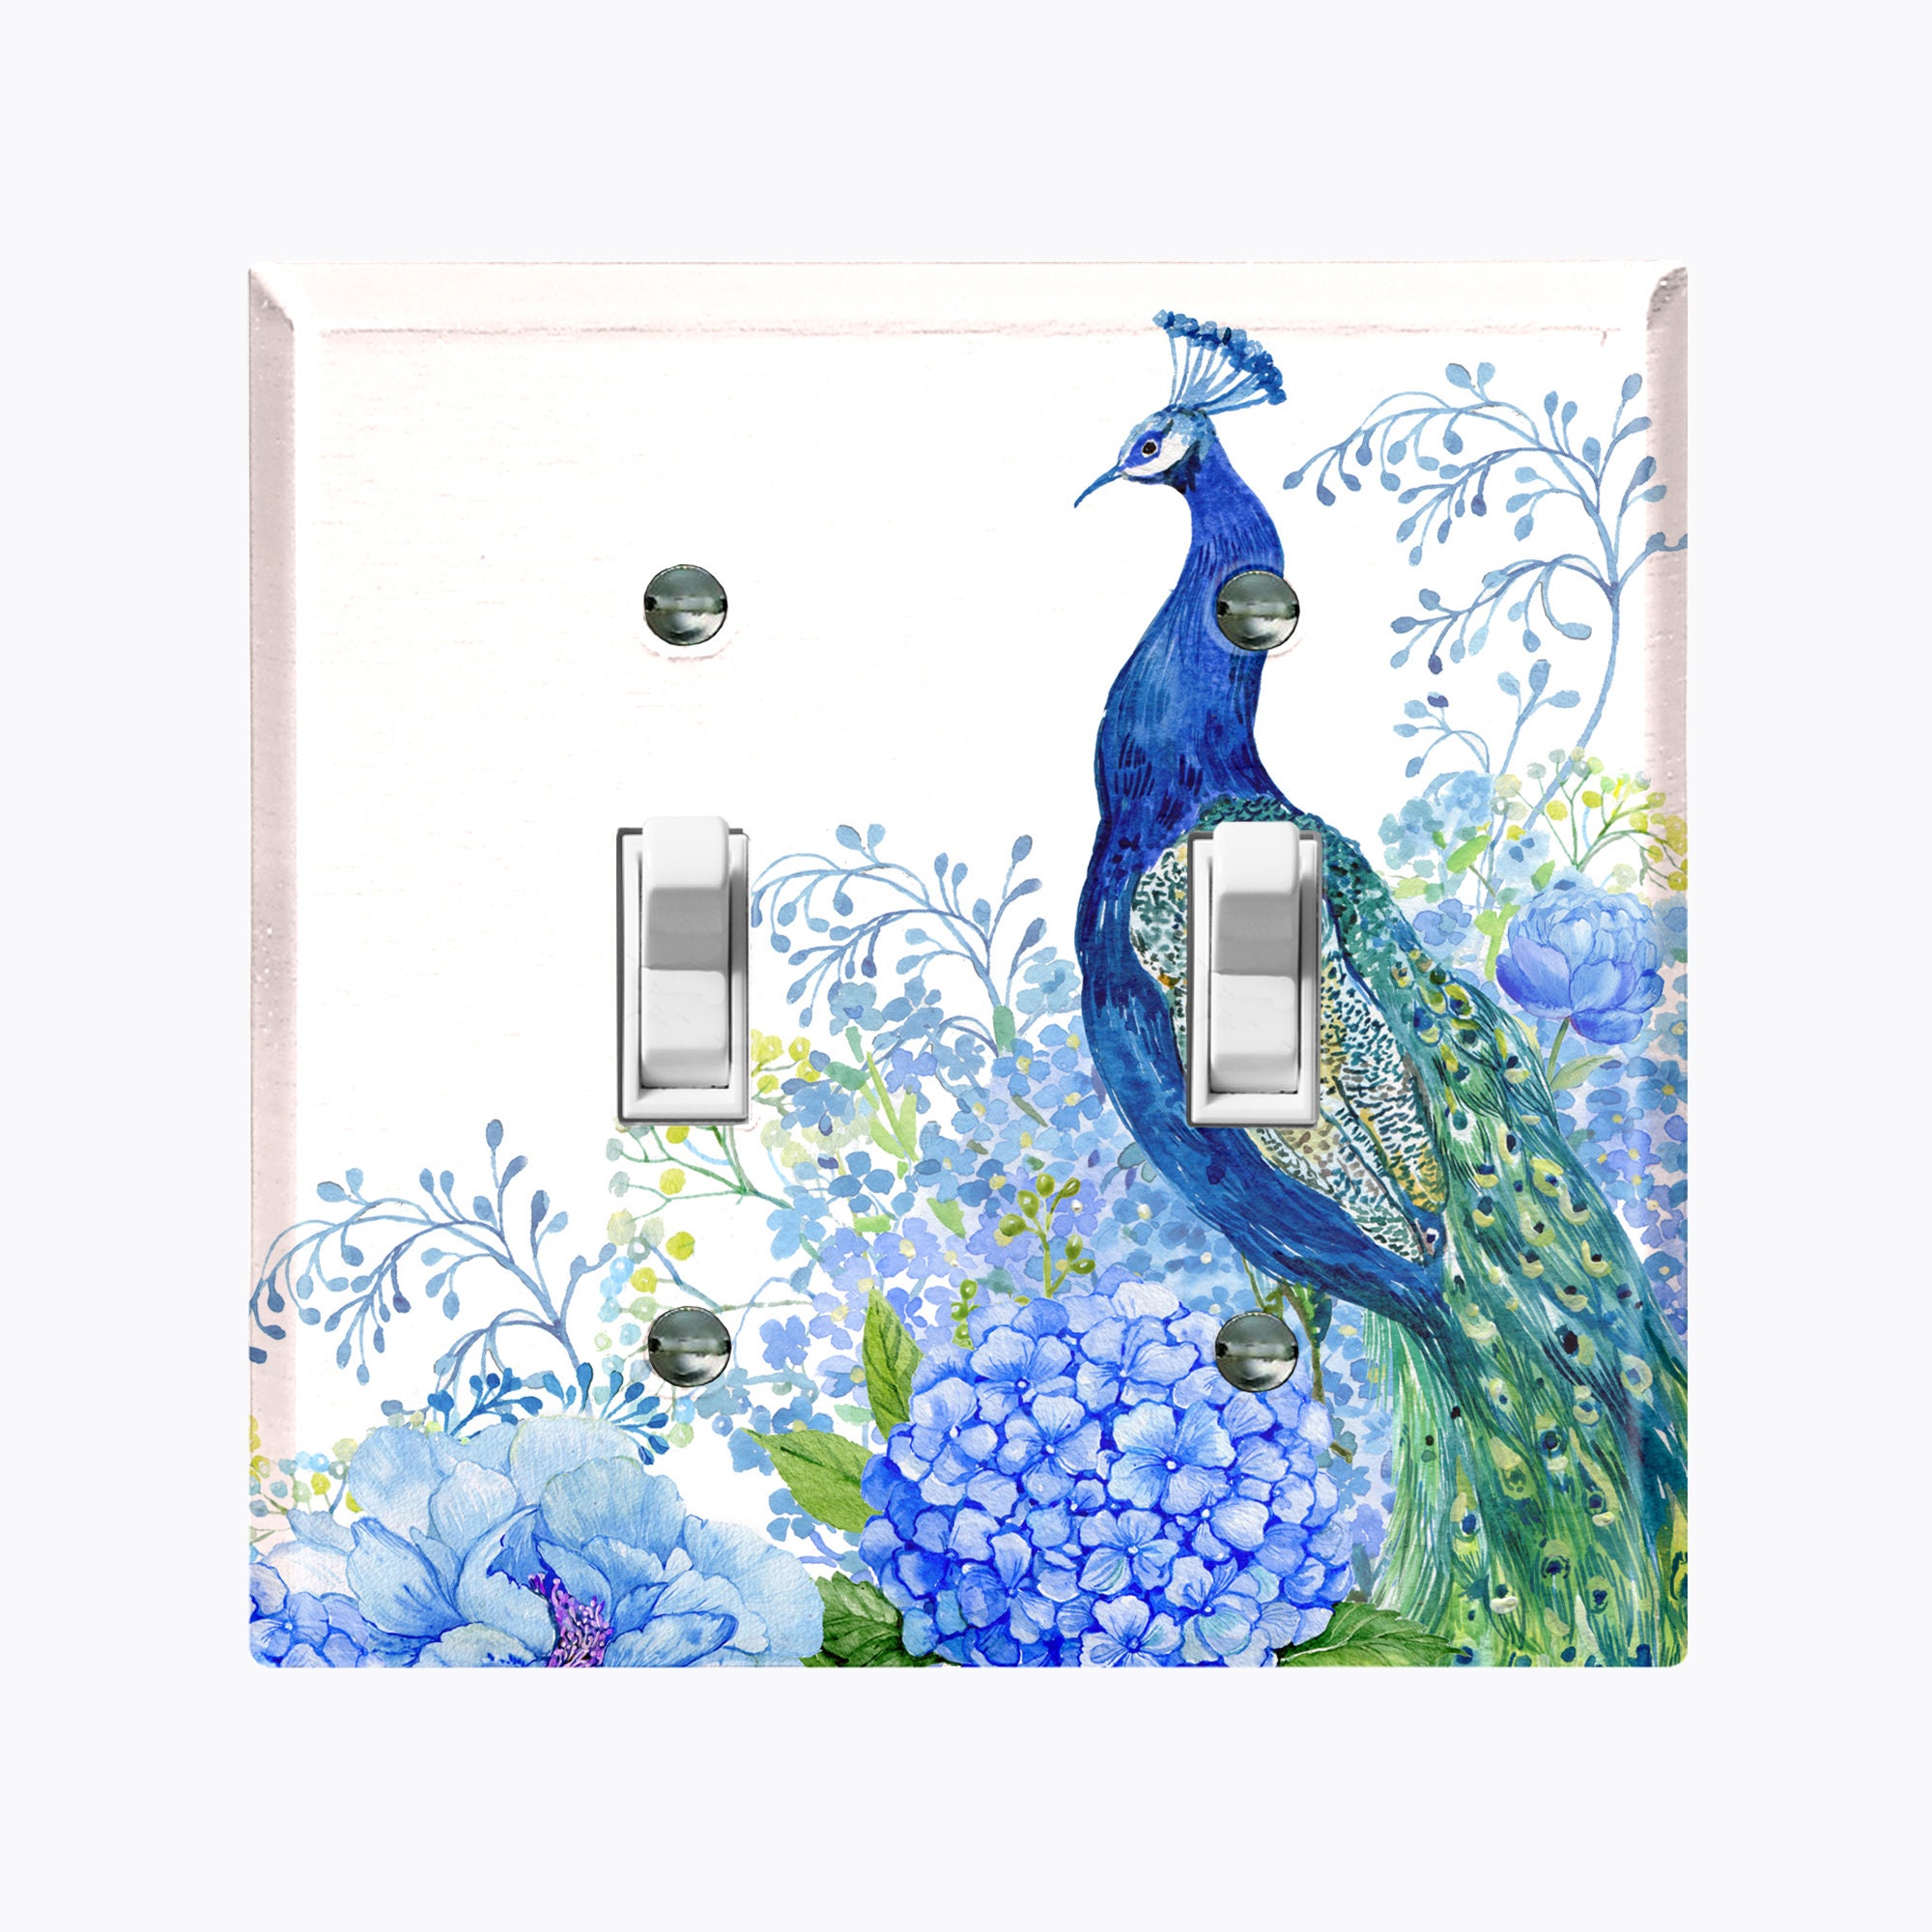 Wall Plate Cover Single Double Triple Outlet Rocker Decor Toggle Home Decor For Kitchen Elegant Floral Bird Tile PNT036 Metal Light Switch